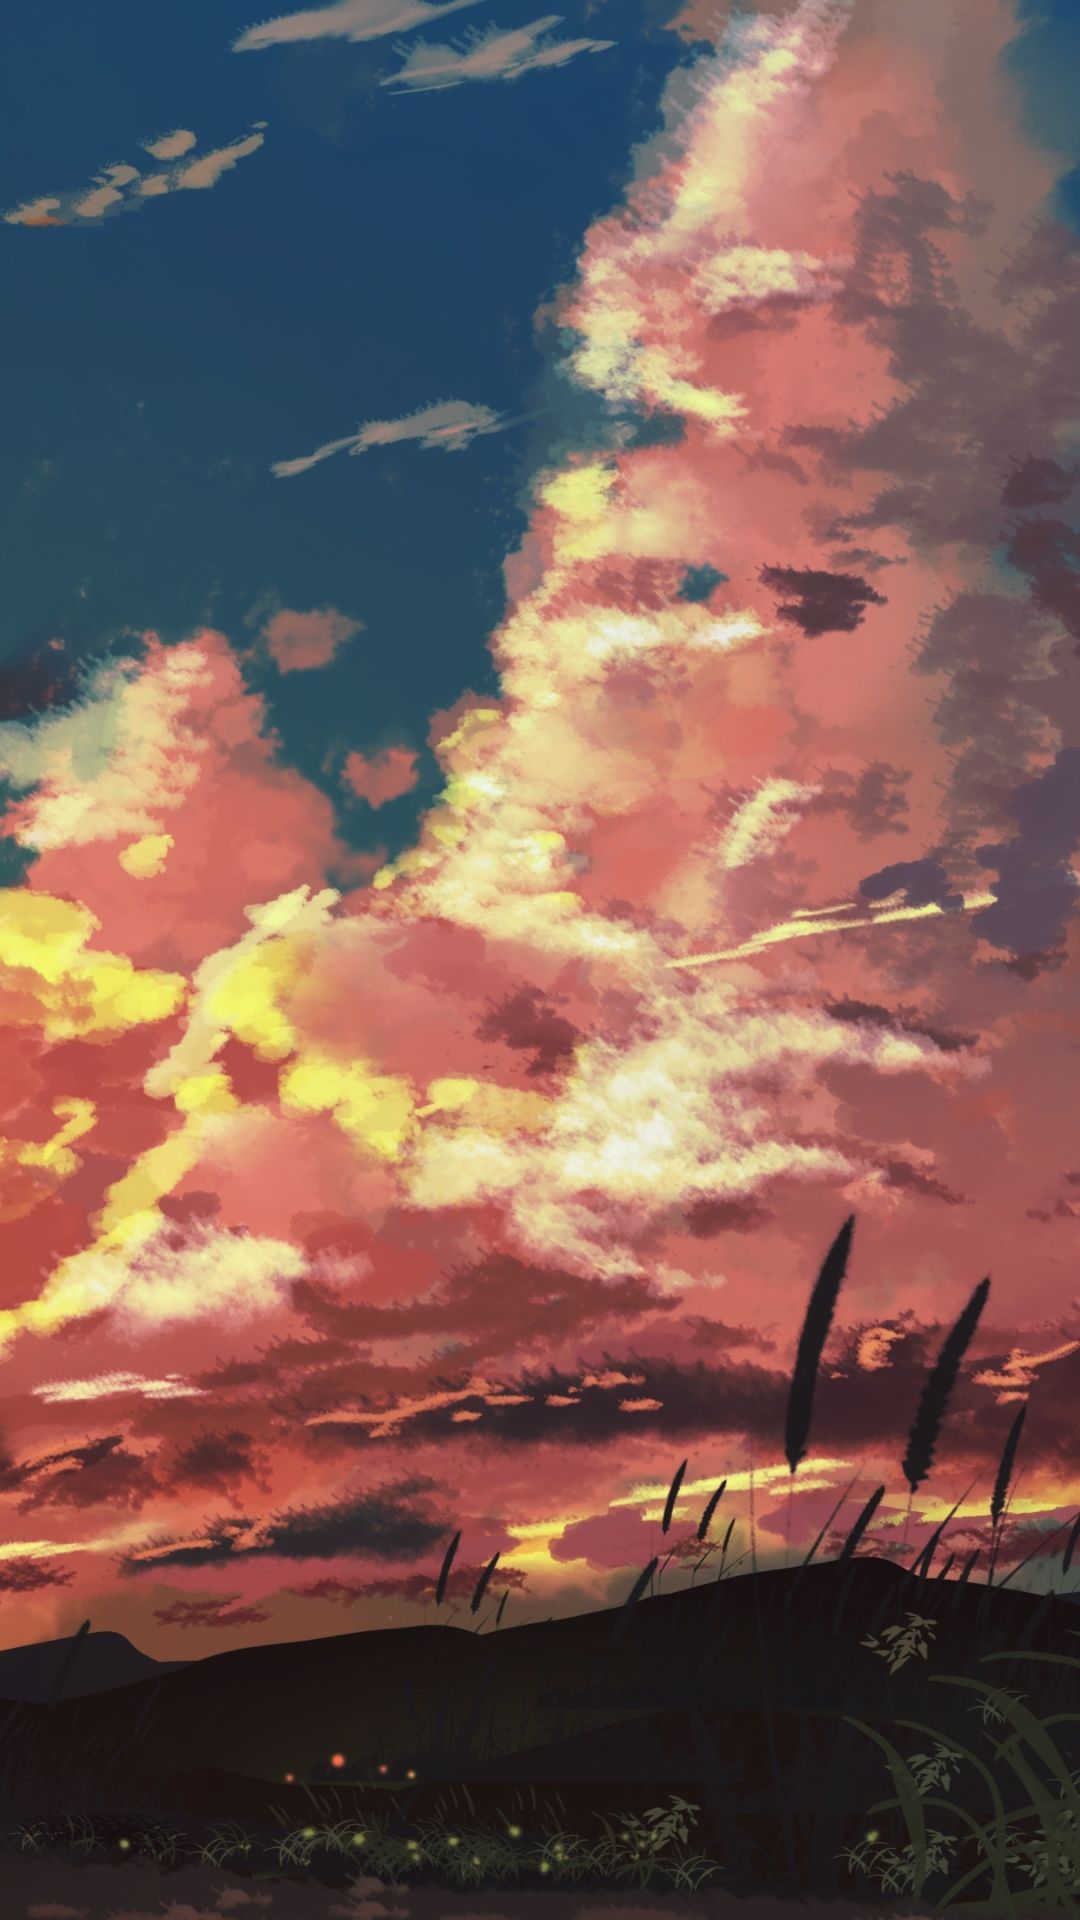 Mobile wallpaper: Anime, Sunset, Sky, Cloud, 1403954 download the picture for free